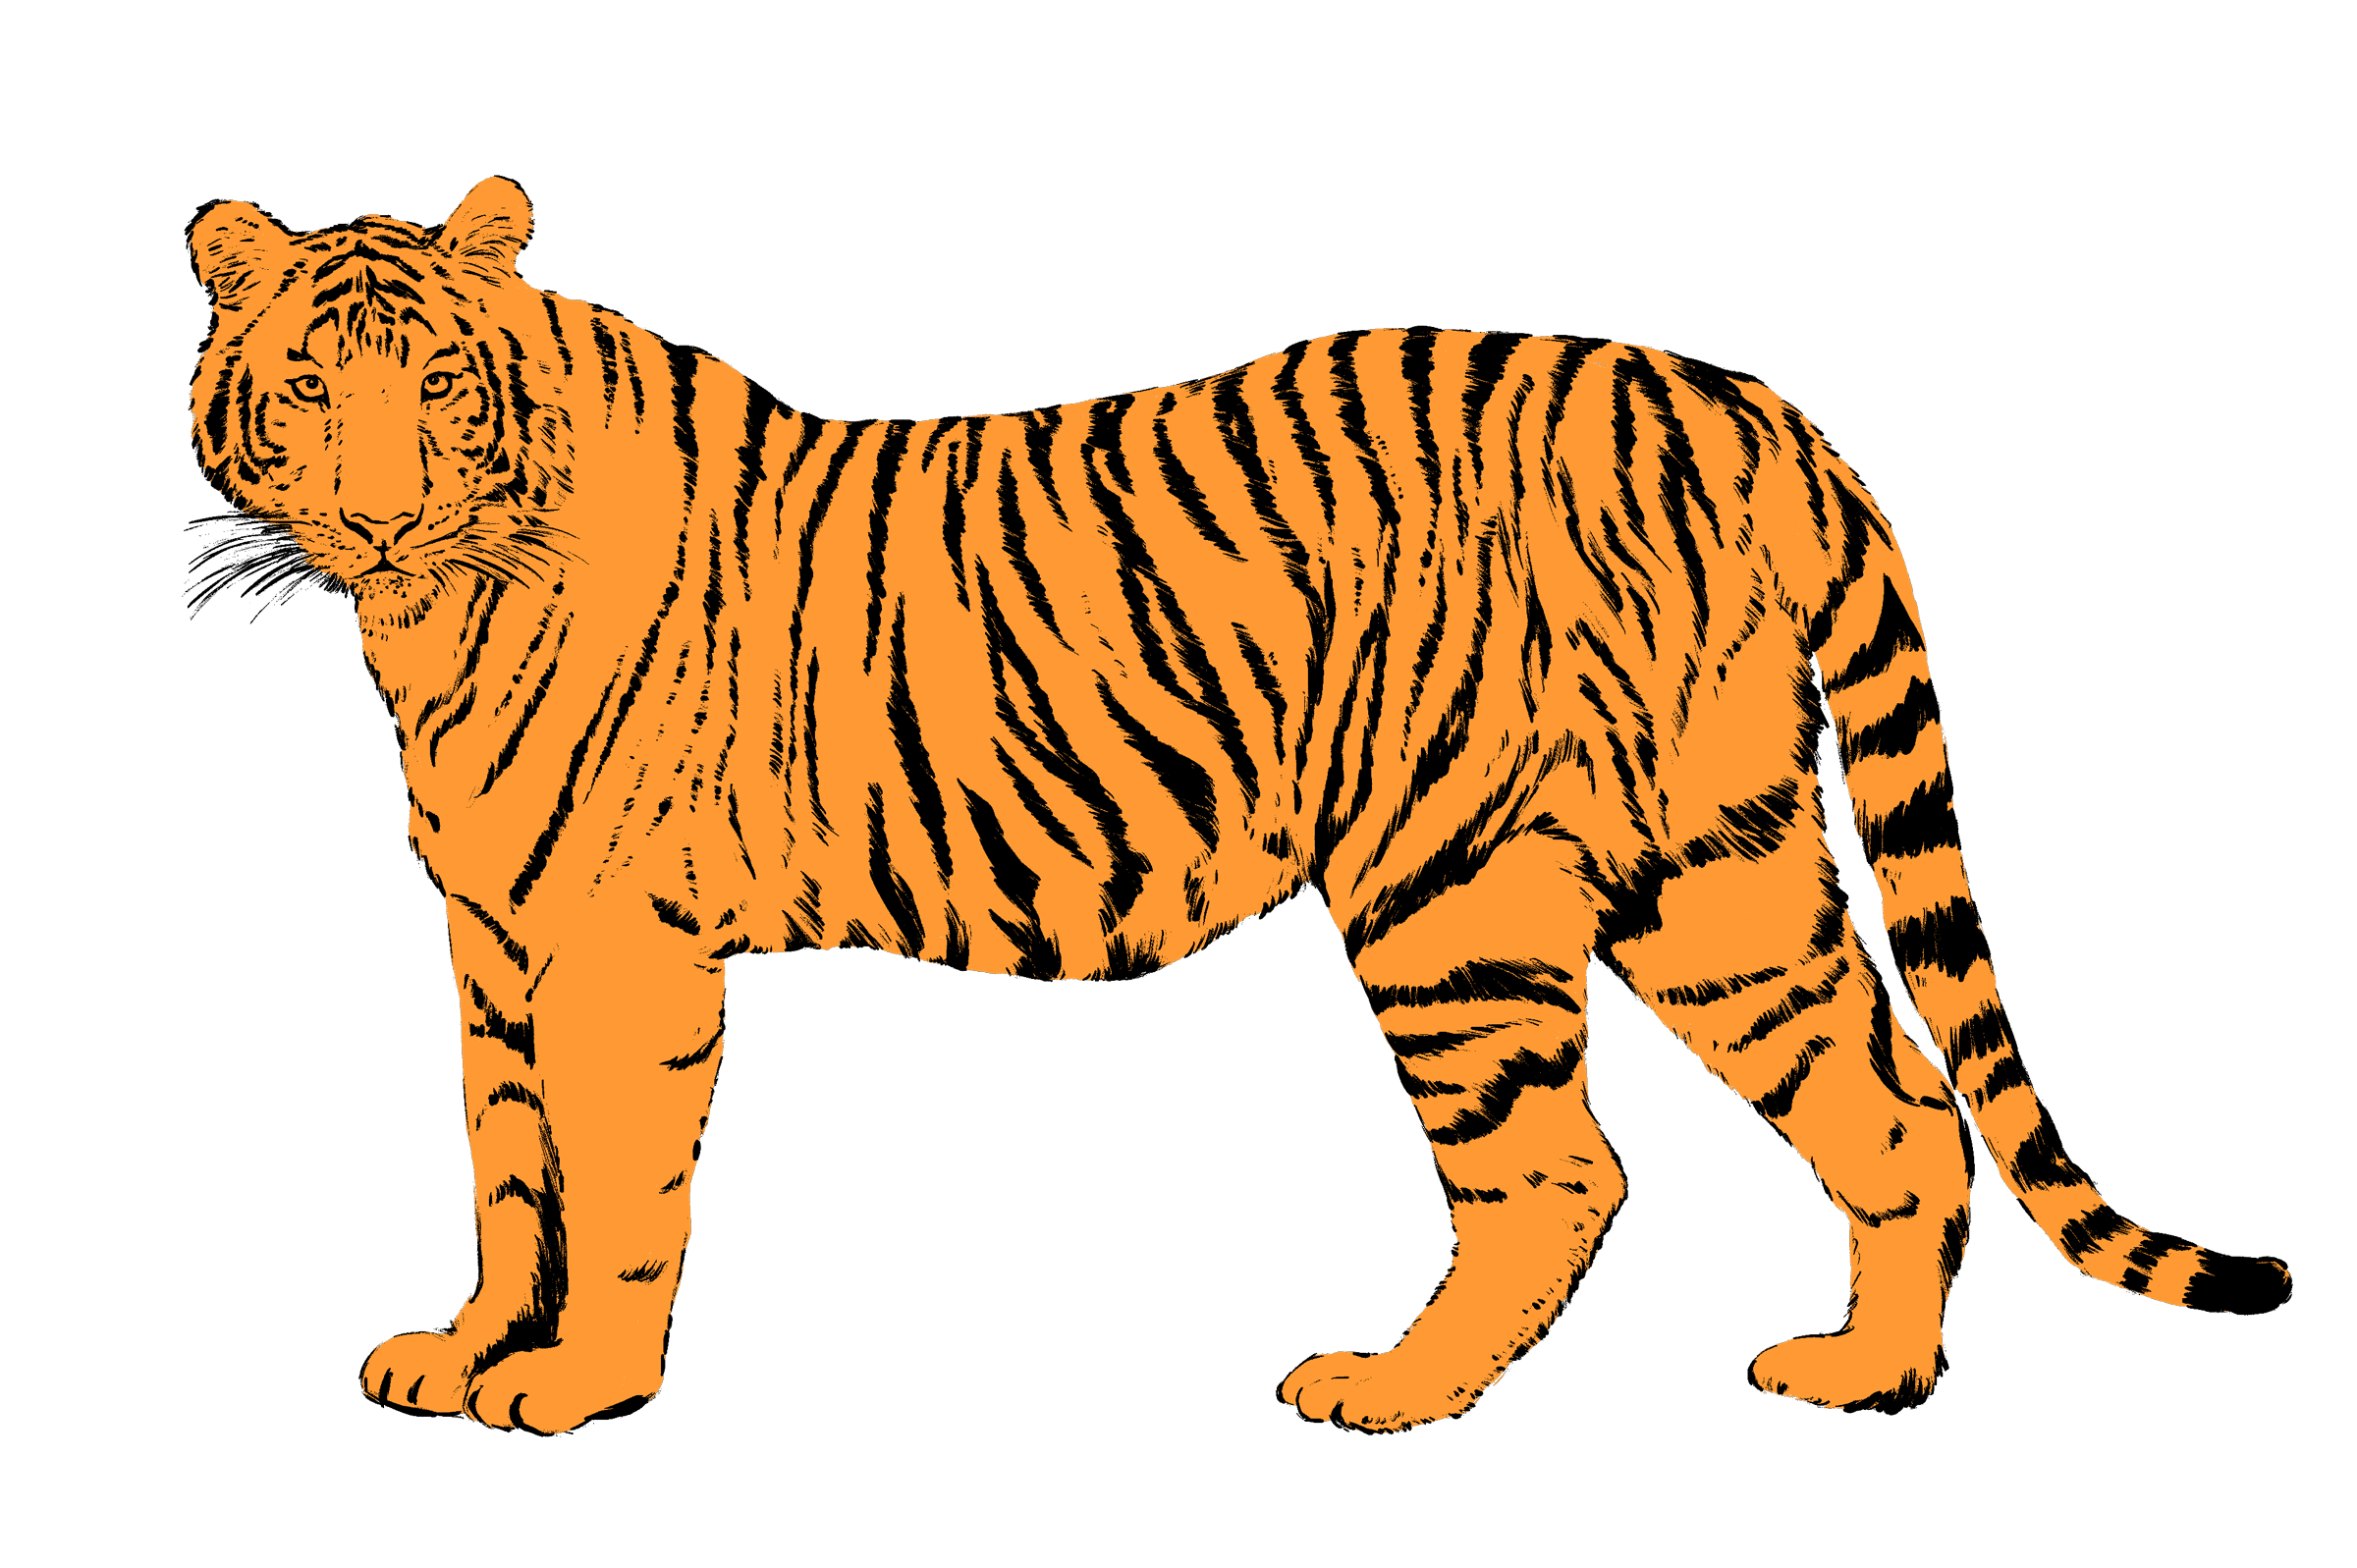 Year of tiger 2022